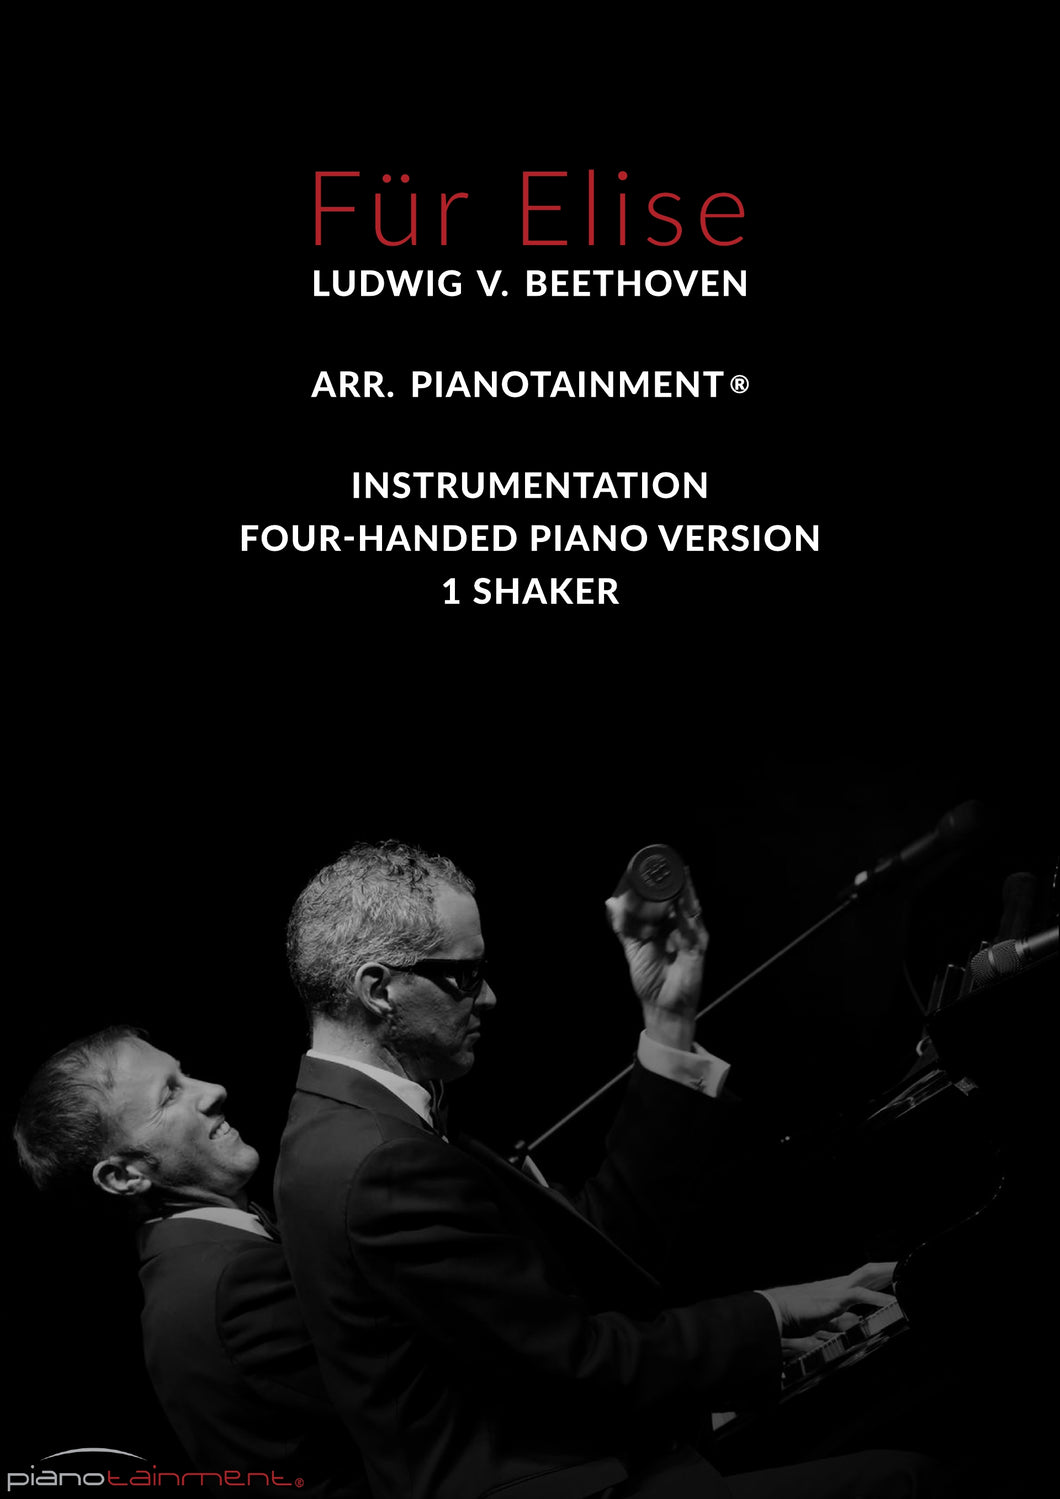 Beethoven/Pianotainment: Für Elise - Sheet Music Download